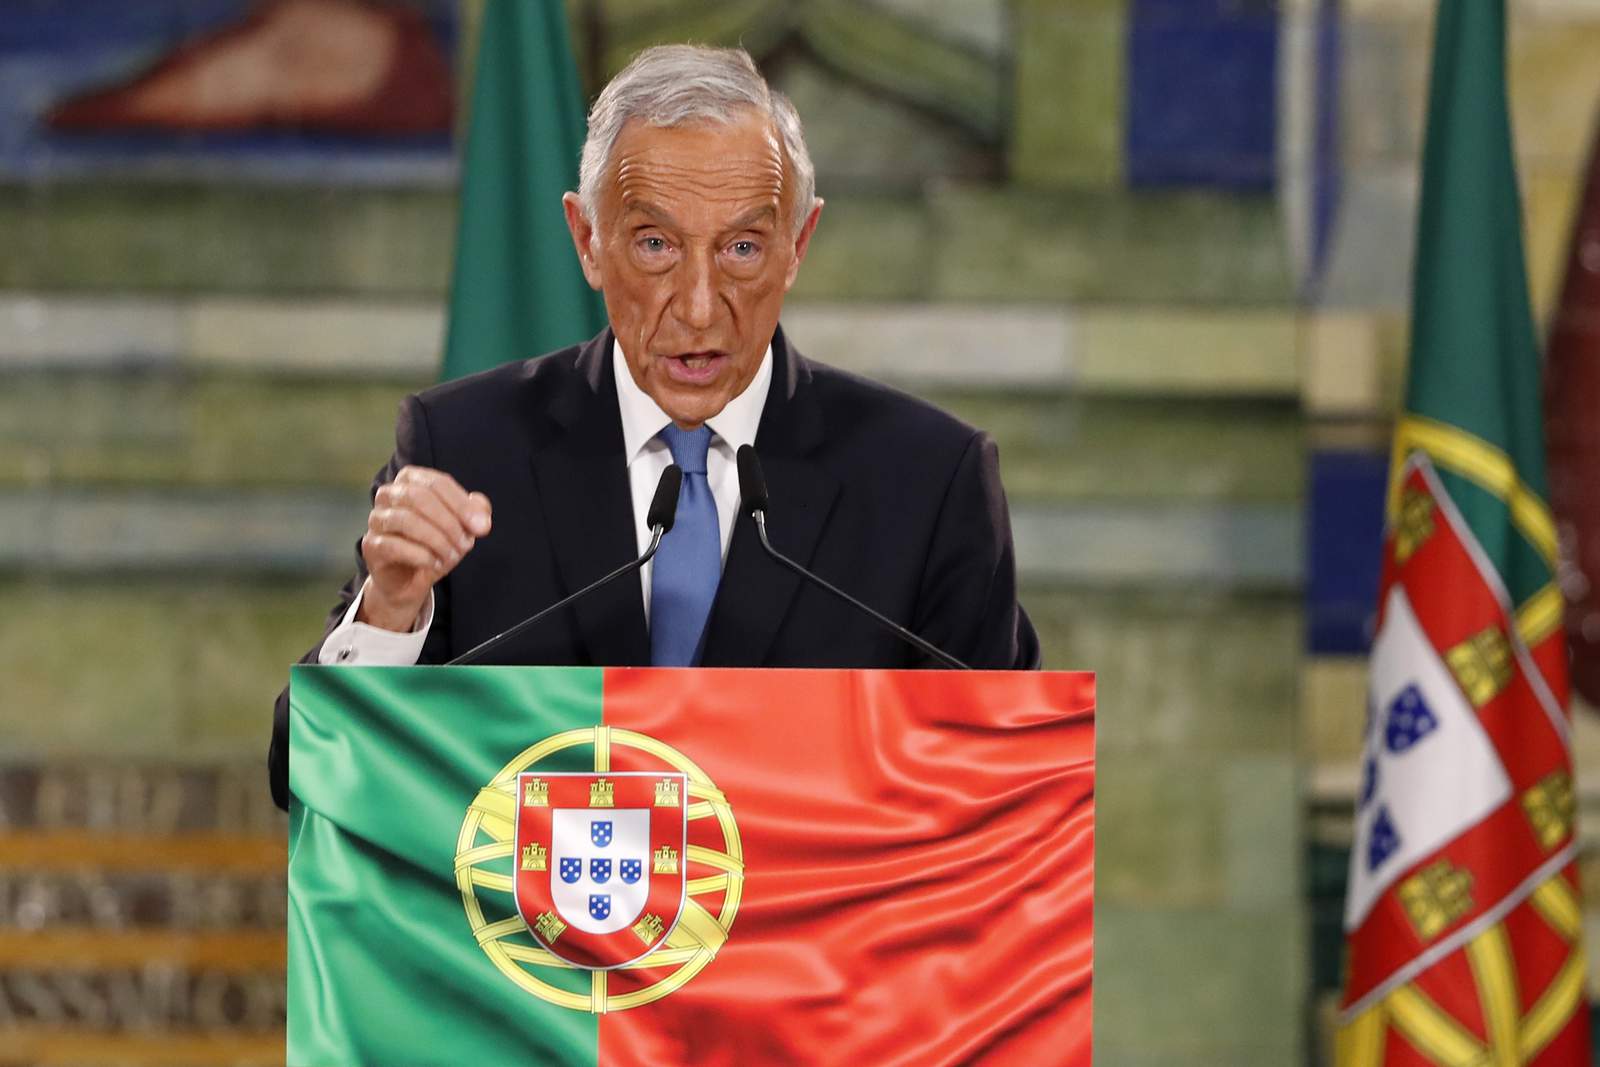 Center-right incumbent wins Portugal's presidential election